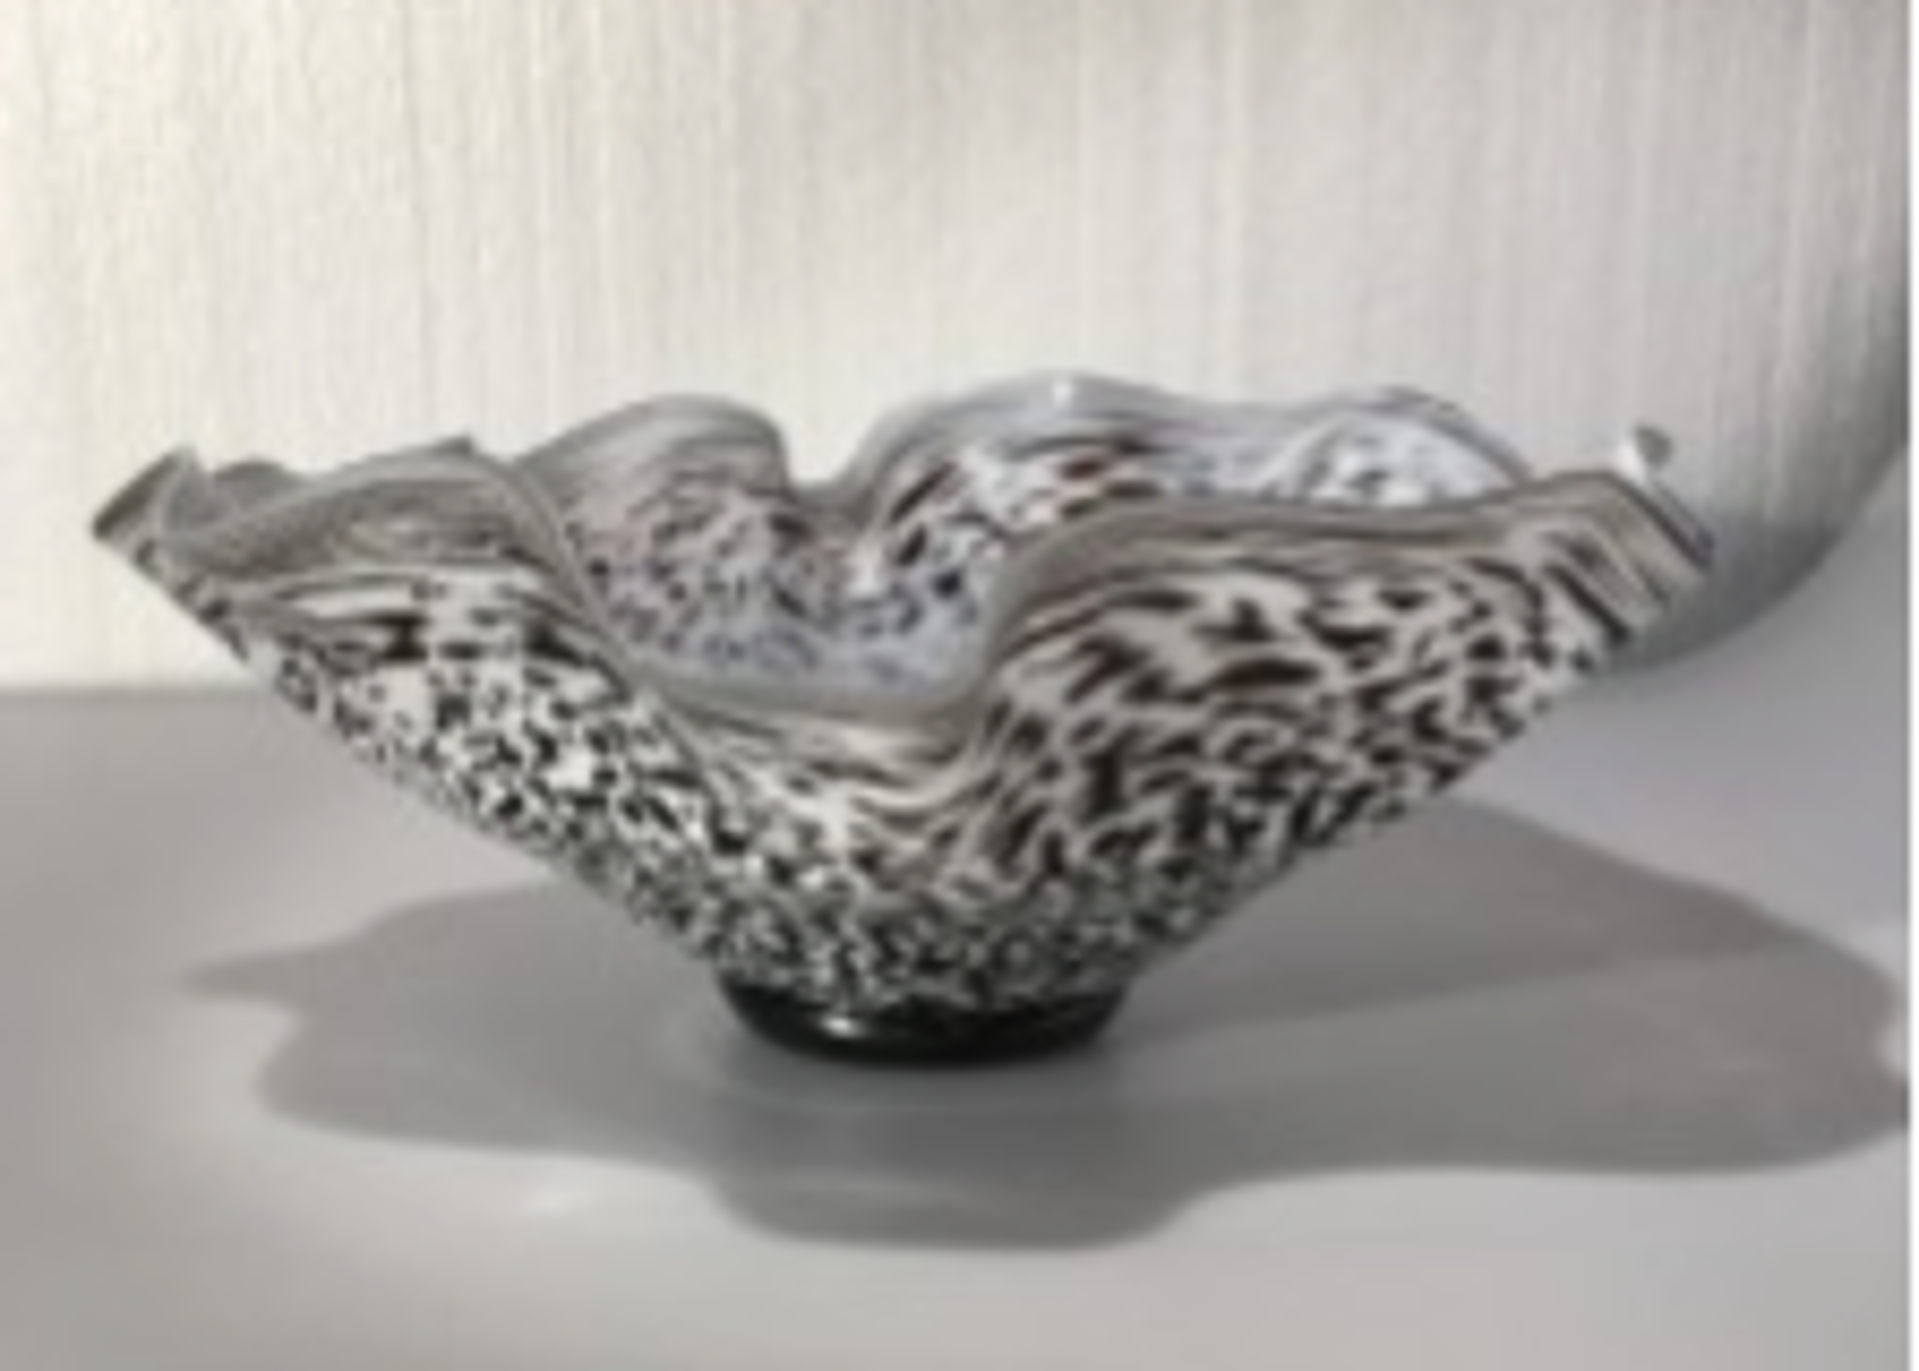 Speckled Egg Wavy Footed Bowl by Hayden MacRae